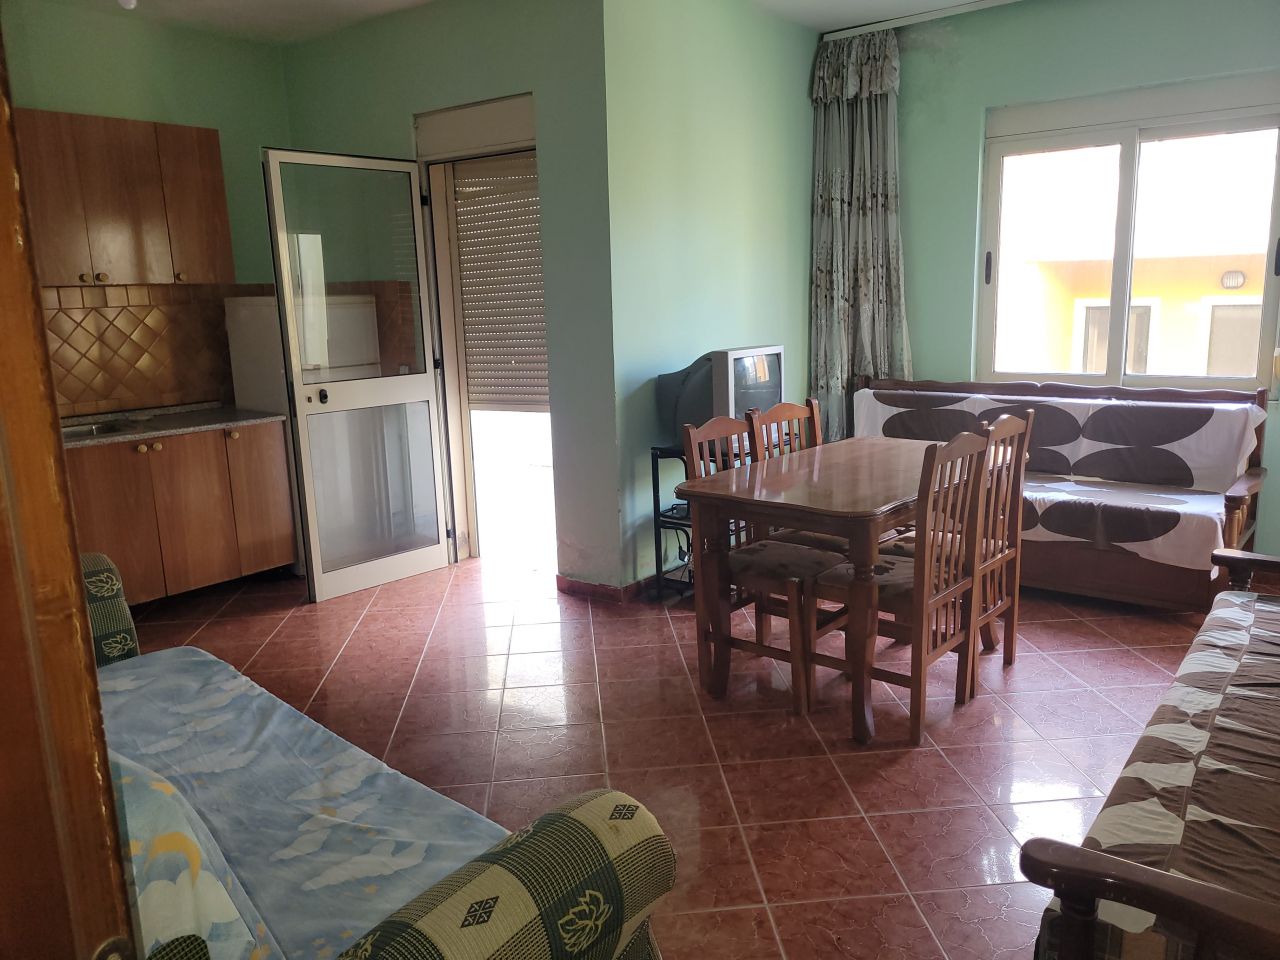 Two Bedroom Property Furnished For Sale At Shkembi I Kavajes In Golem Just A Few Meters From The Sea